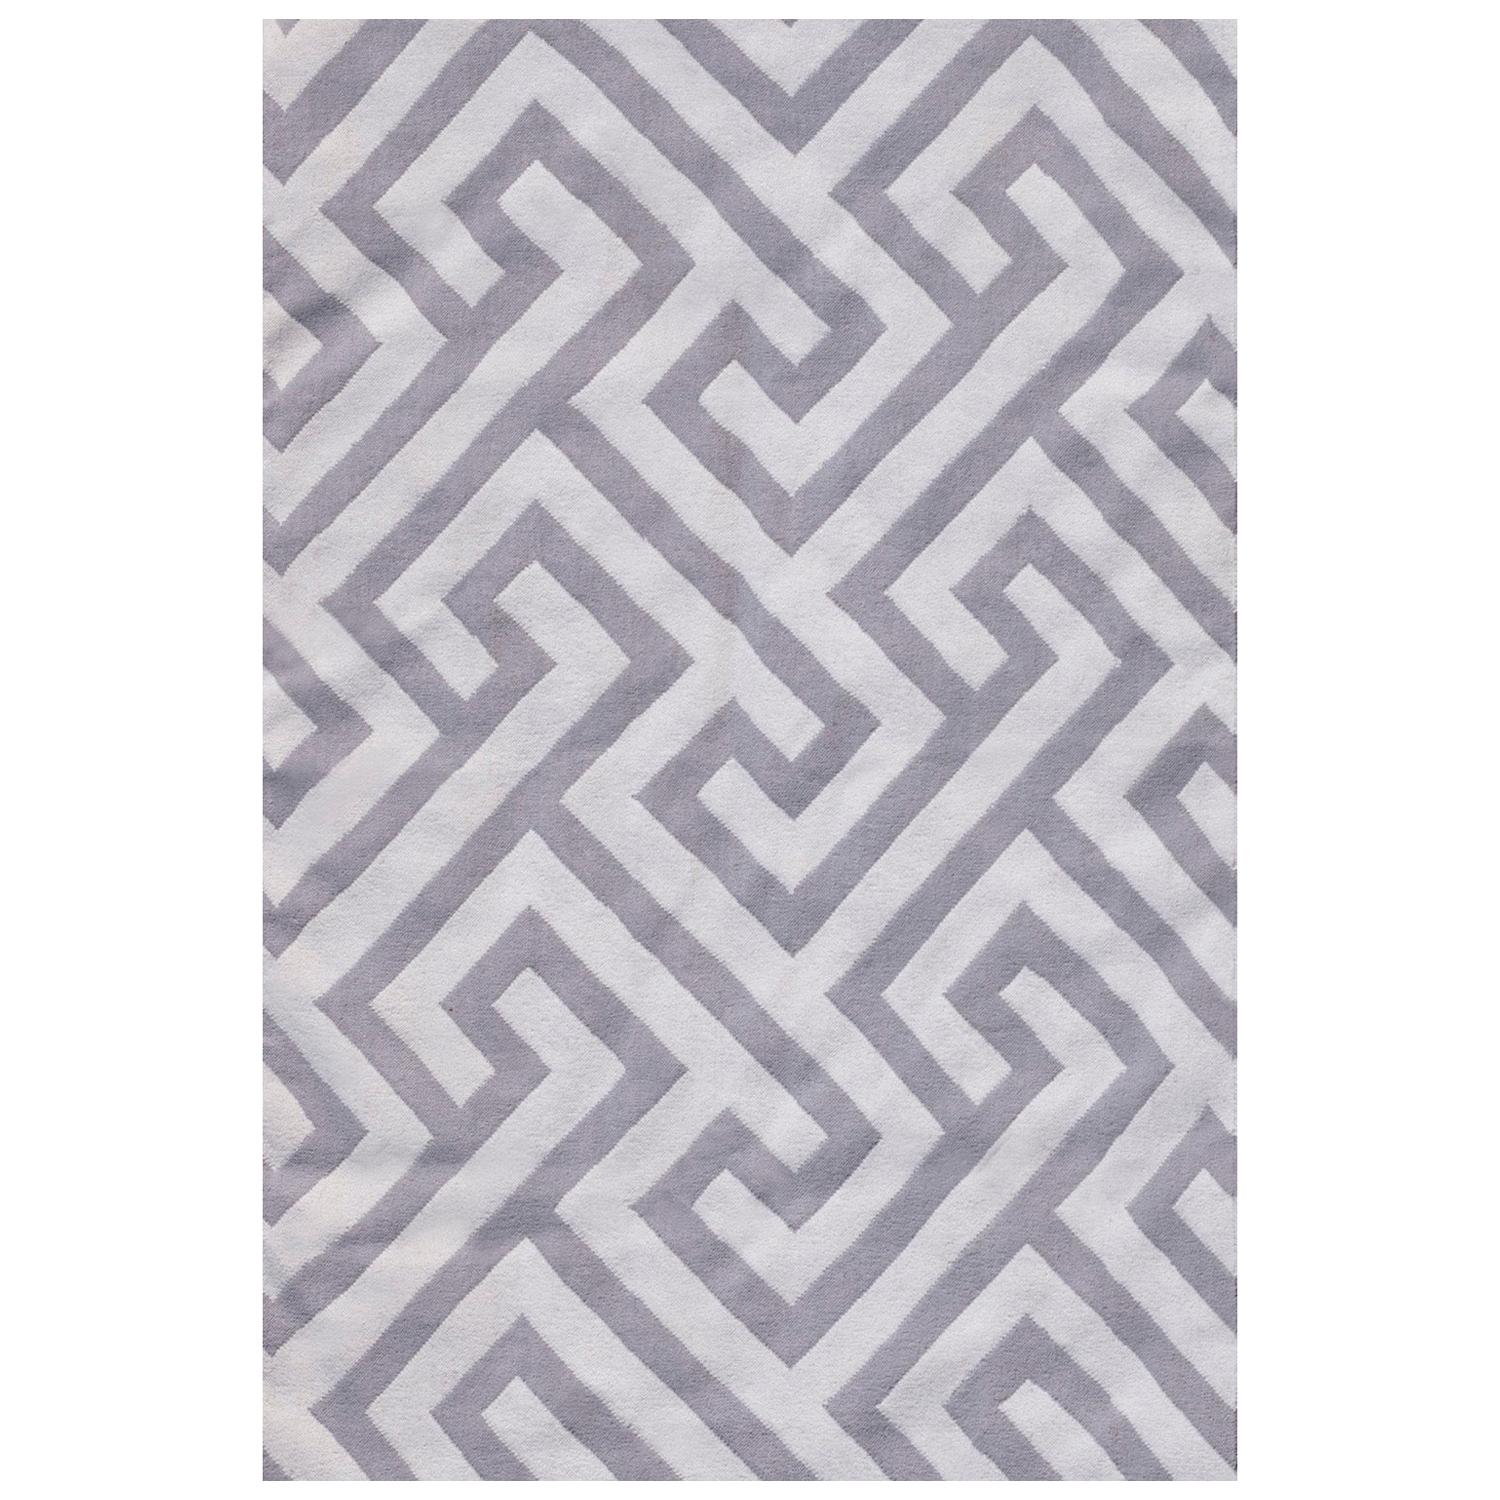 Contemporary Modern Handwoven Flat-Weave Wool Kilim Rug White and Grey Geometric